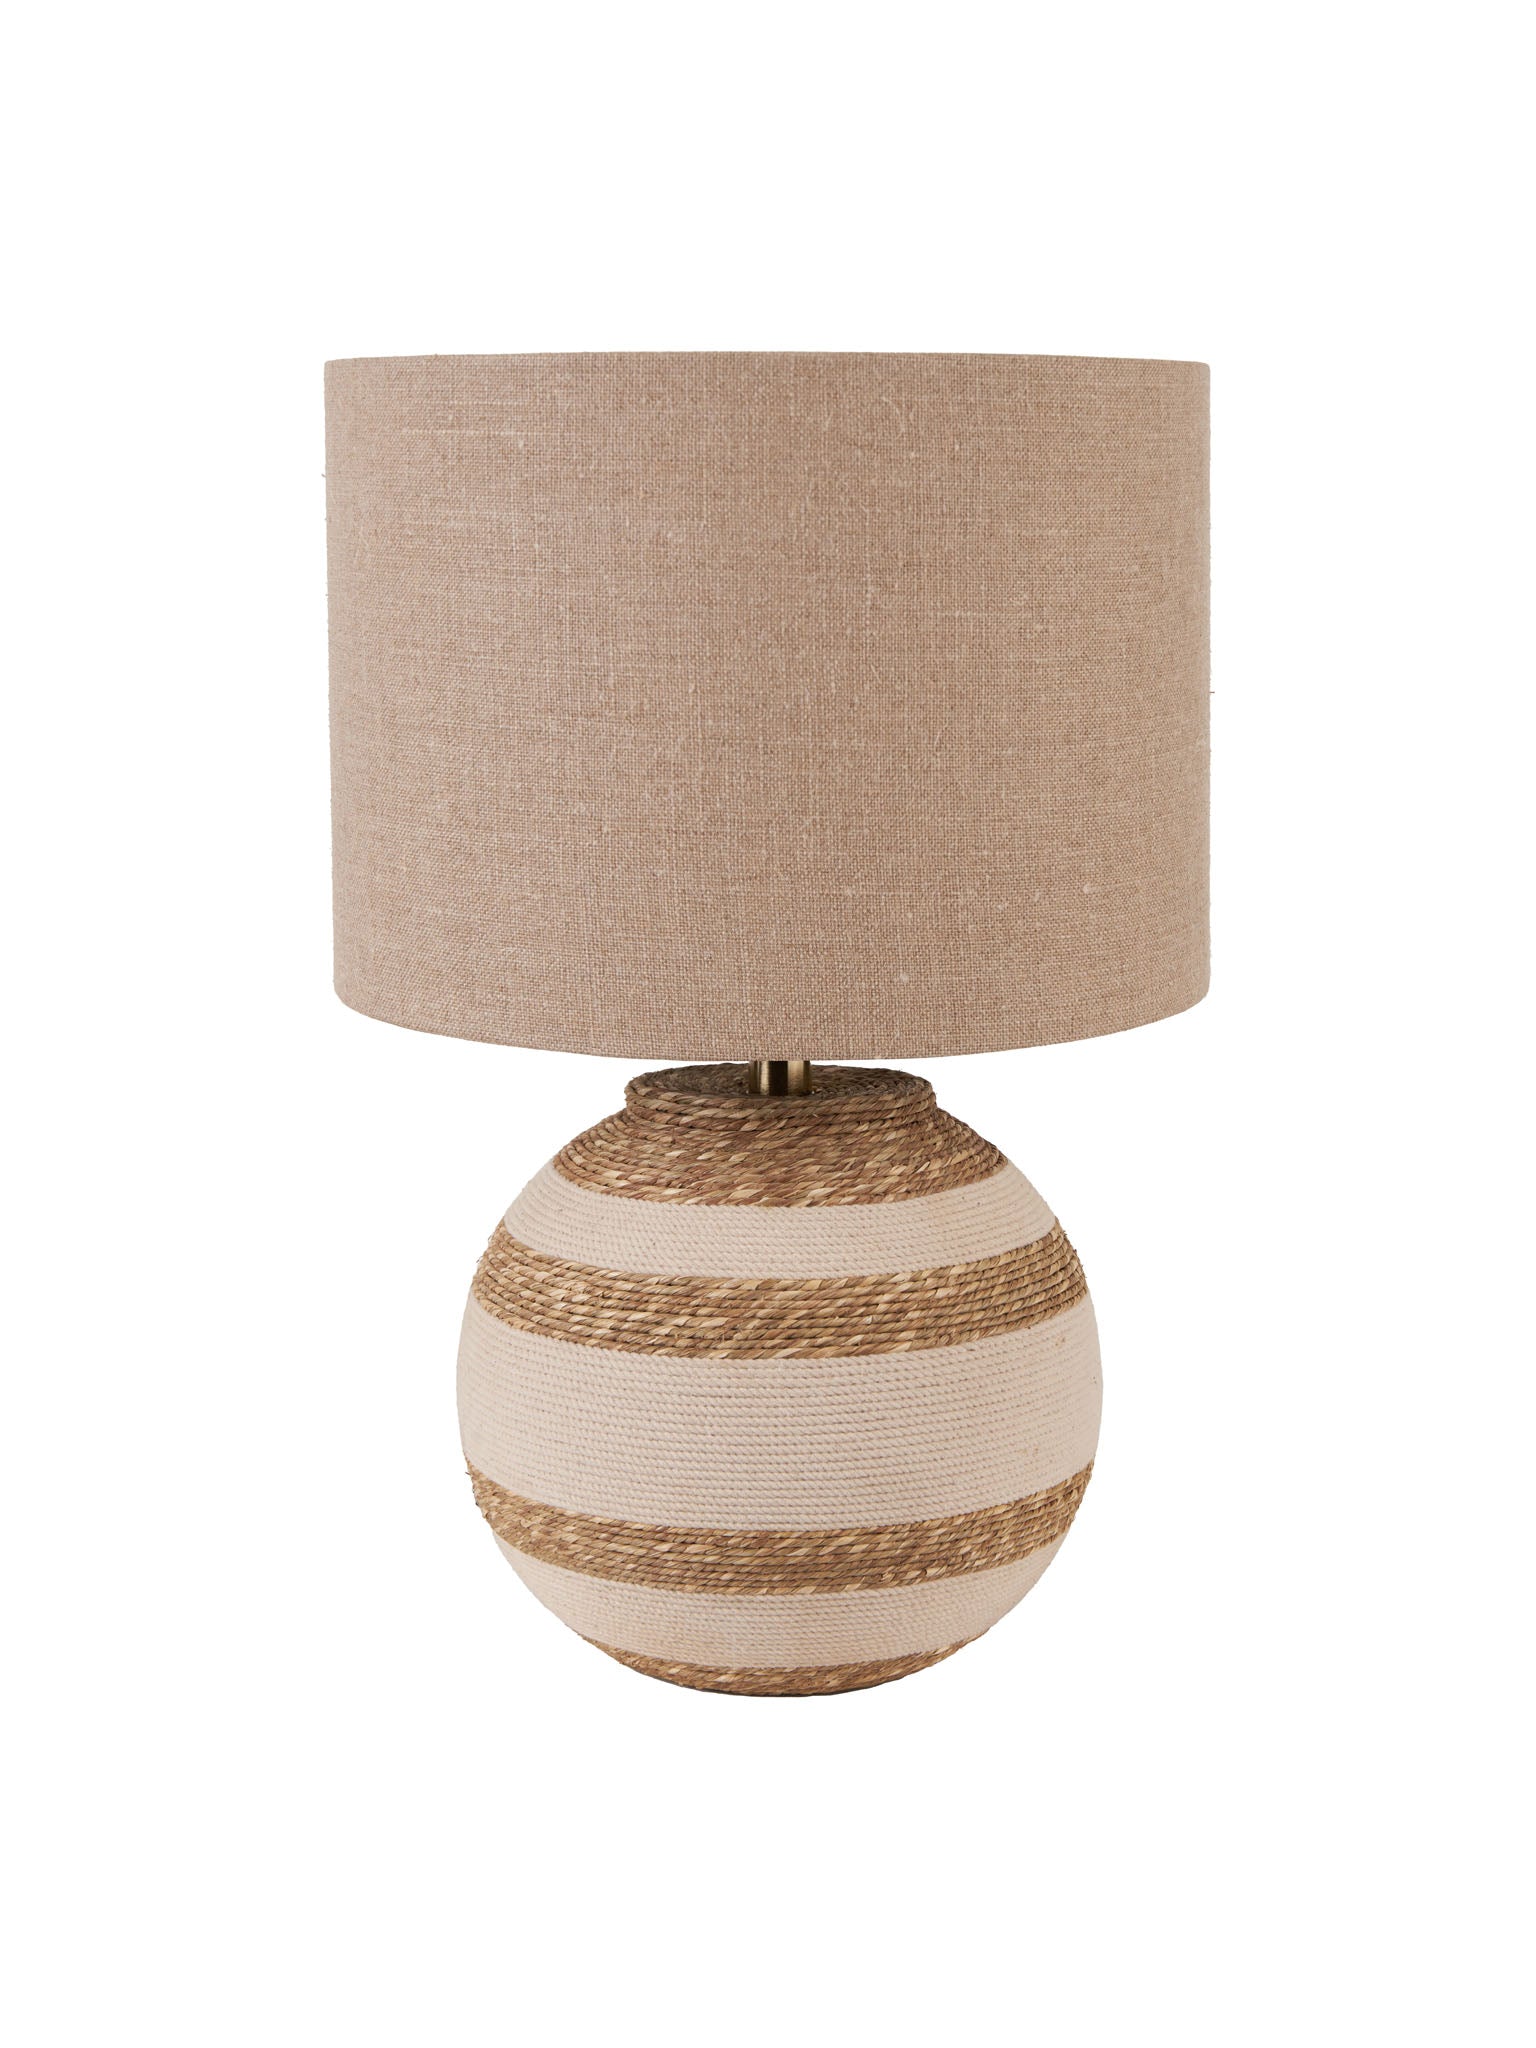 Tula Cream and Natural Sea Grass Round Table Lamp with Edward 35cm Natural Linen Cylinder Shade